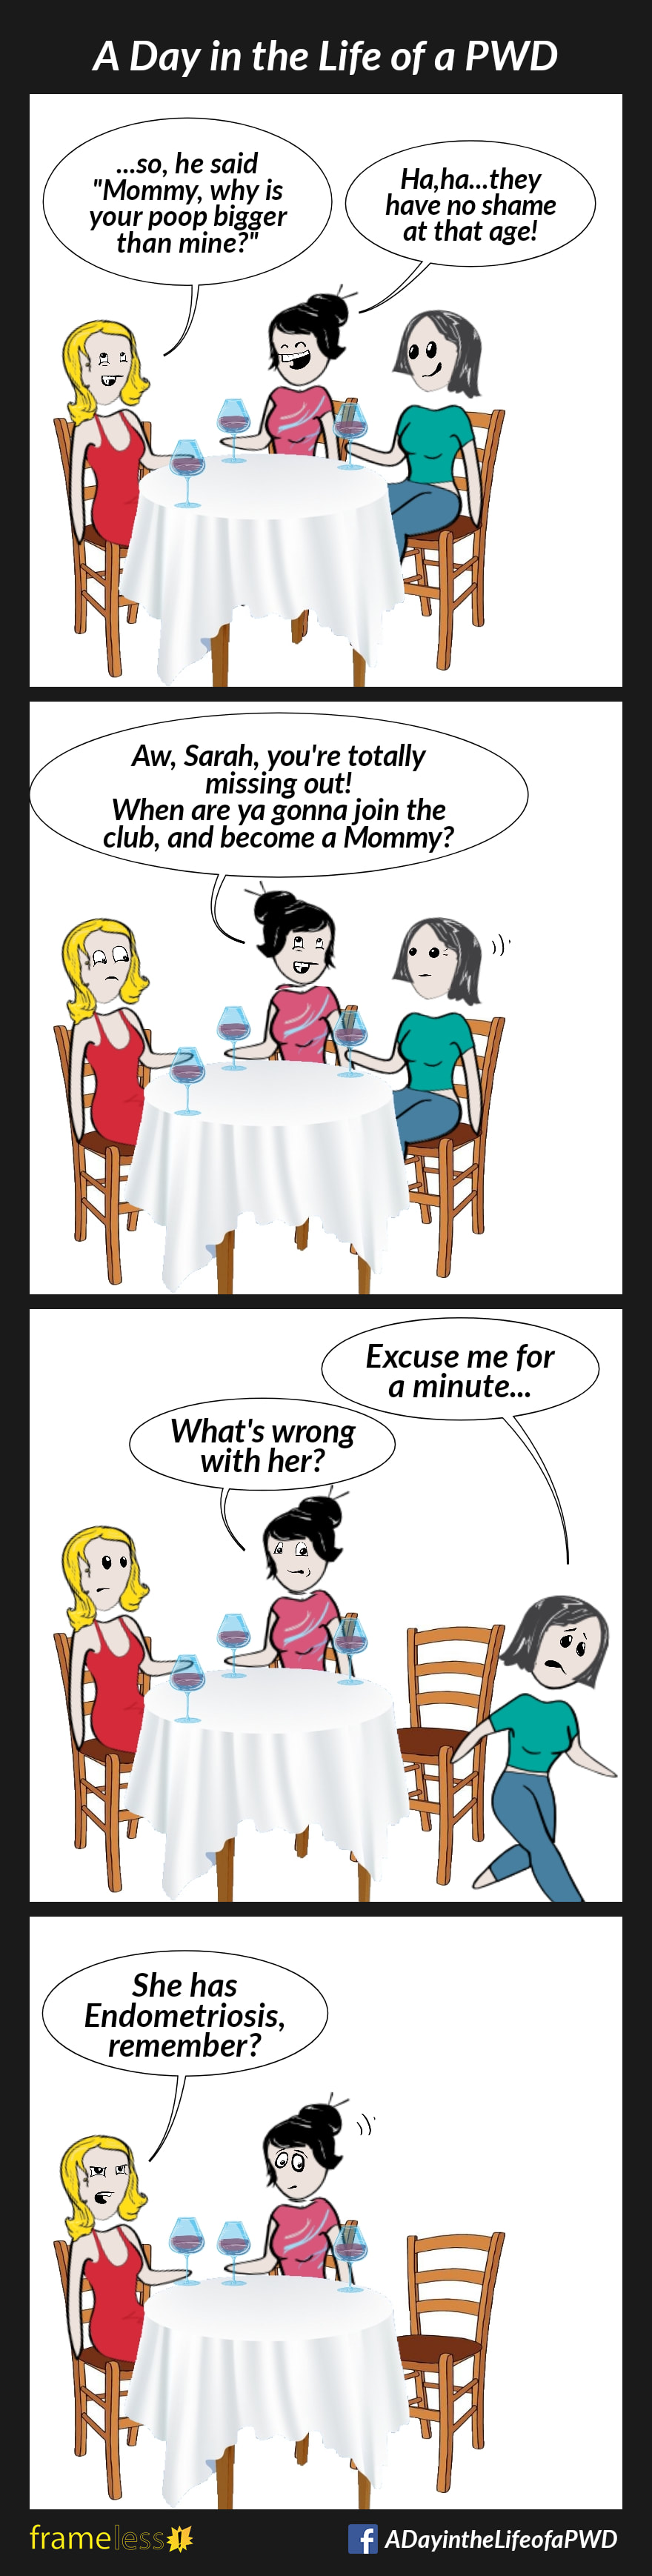 COMIC STRIP 
A Day in the Life of a PWD (Person With a Disability) 

Frame 1:
Sarah is sitting in a restaurant drinking wine with two friends. 
FRIEND A: 